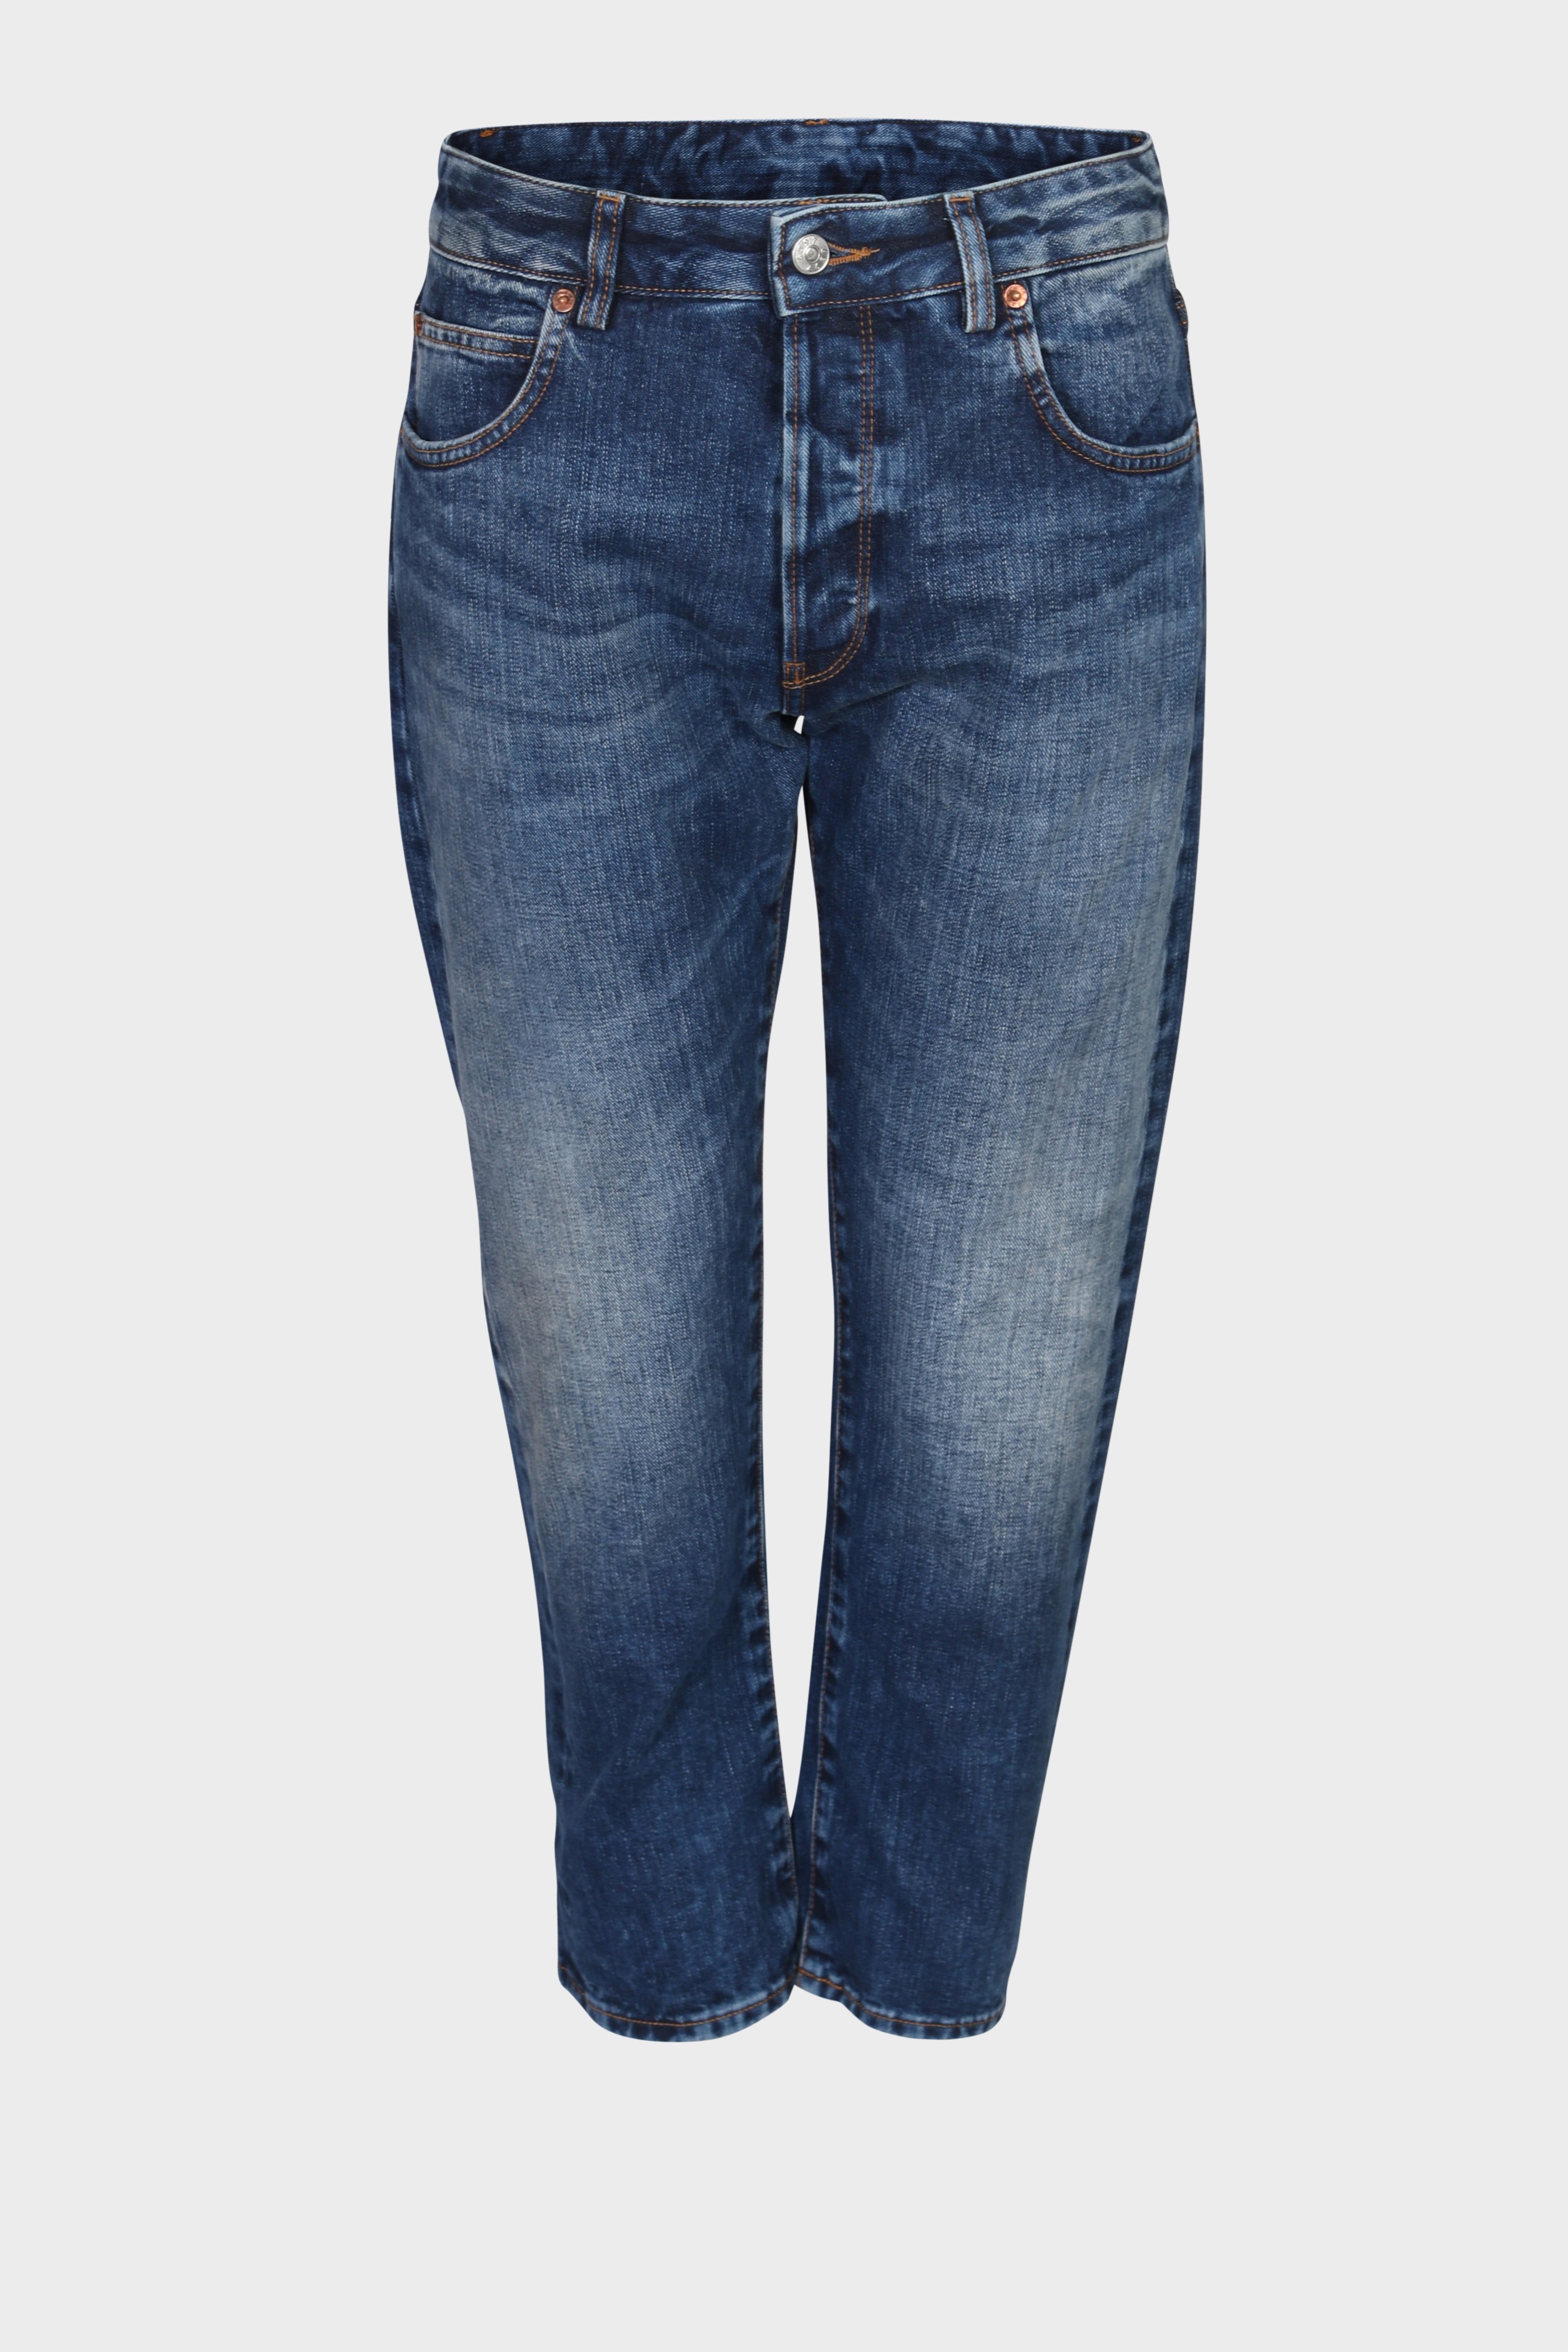 6397 Shorty Jeans in Hi-Contrast Blue